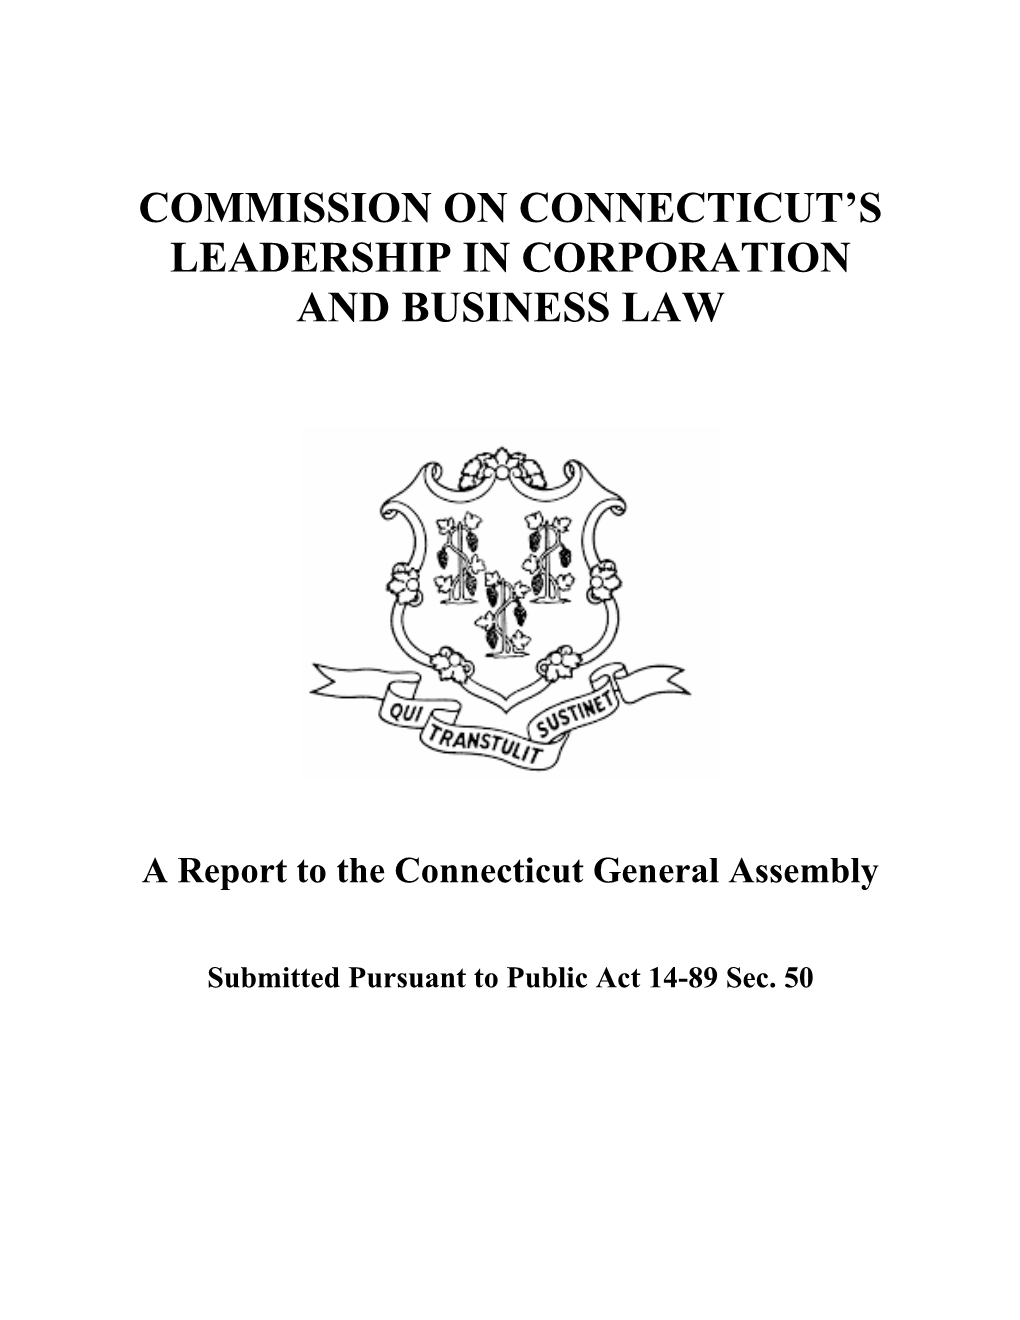 Commission on Connecticut's Leadership in Corporation and Business Law